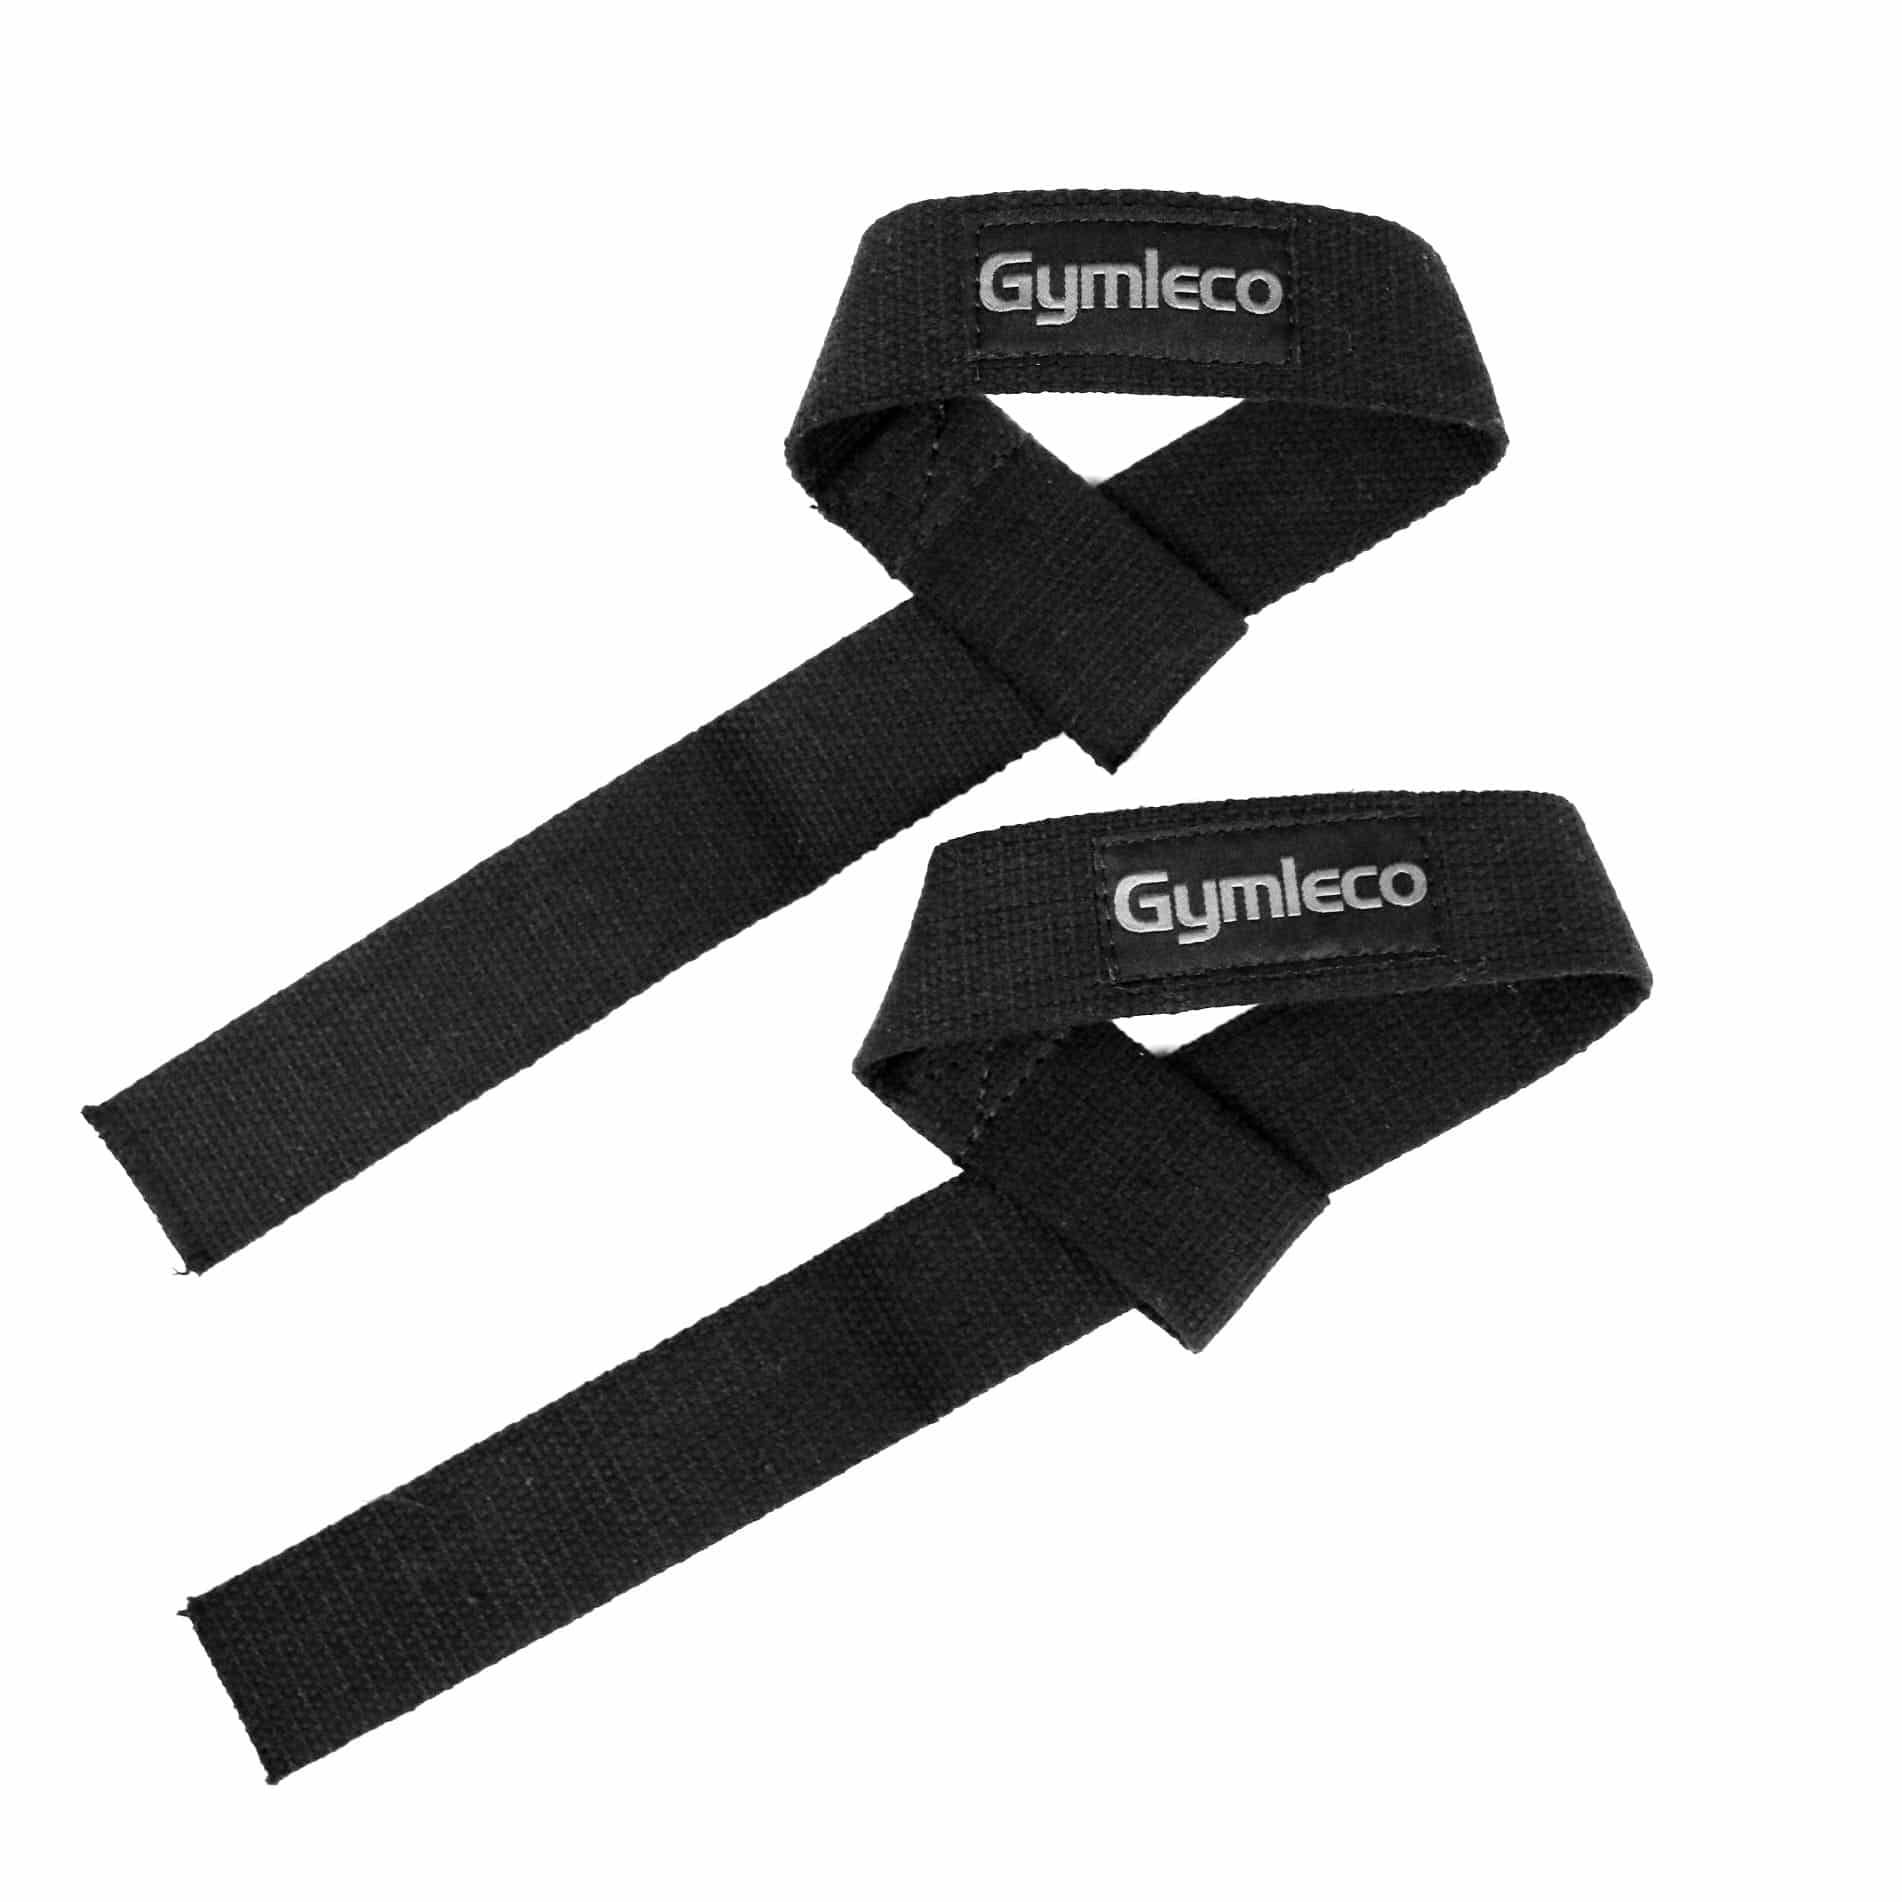 Lifting straps in nylon from Gymleco